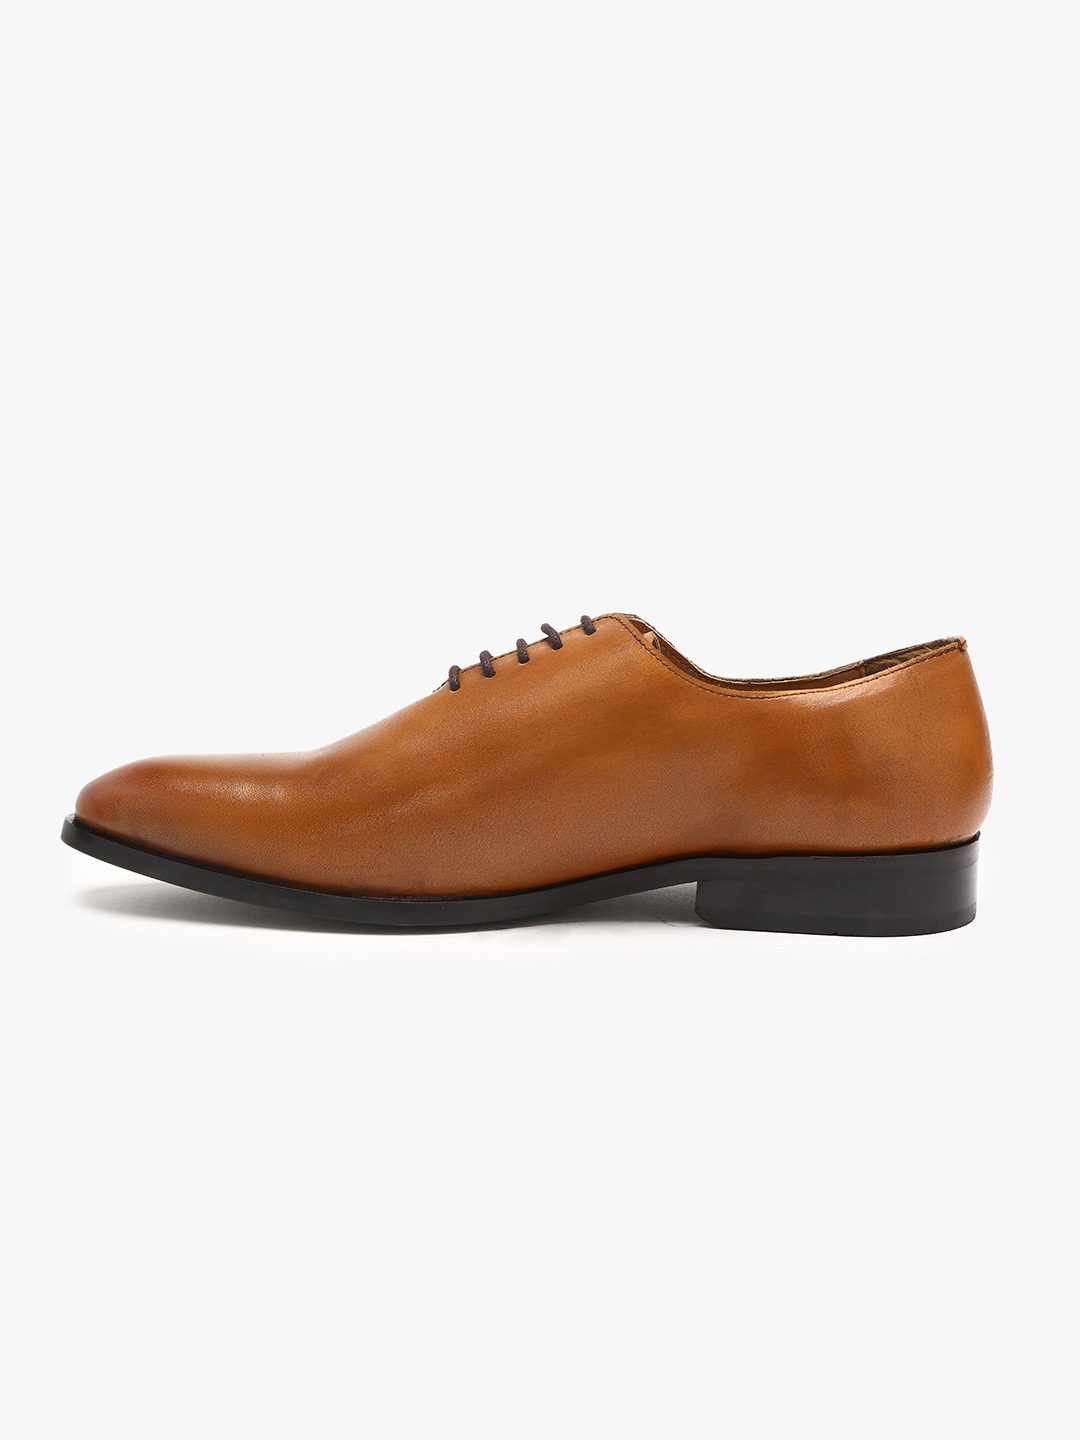 Buy Leather Tan Wholecut Oxford Shoes online In India